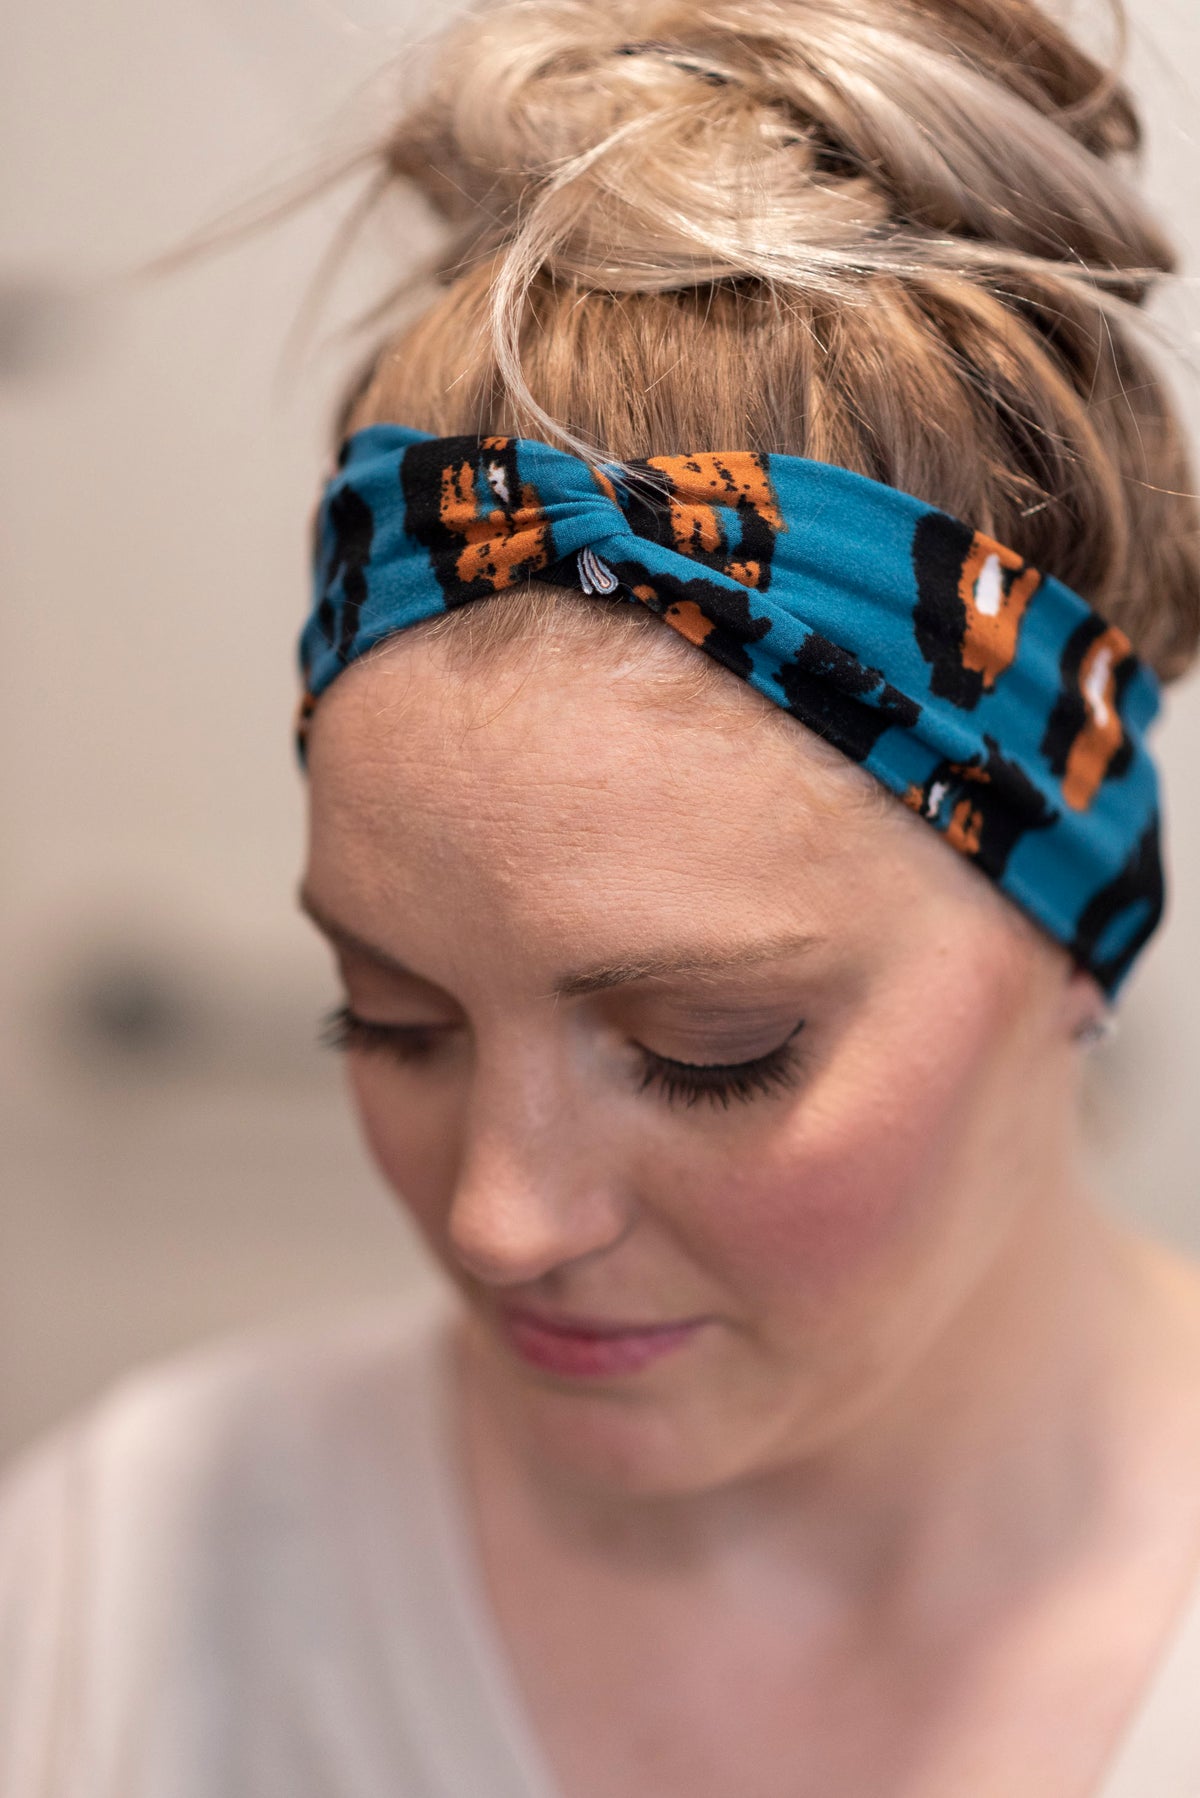 Handmade Knotted Headband in Teal Leopard